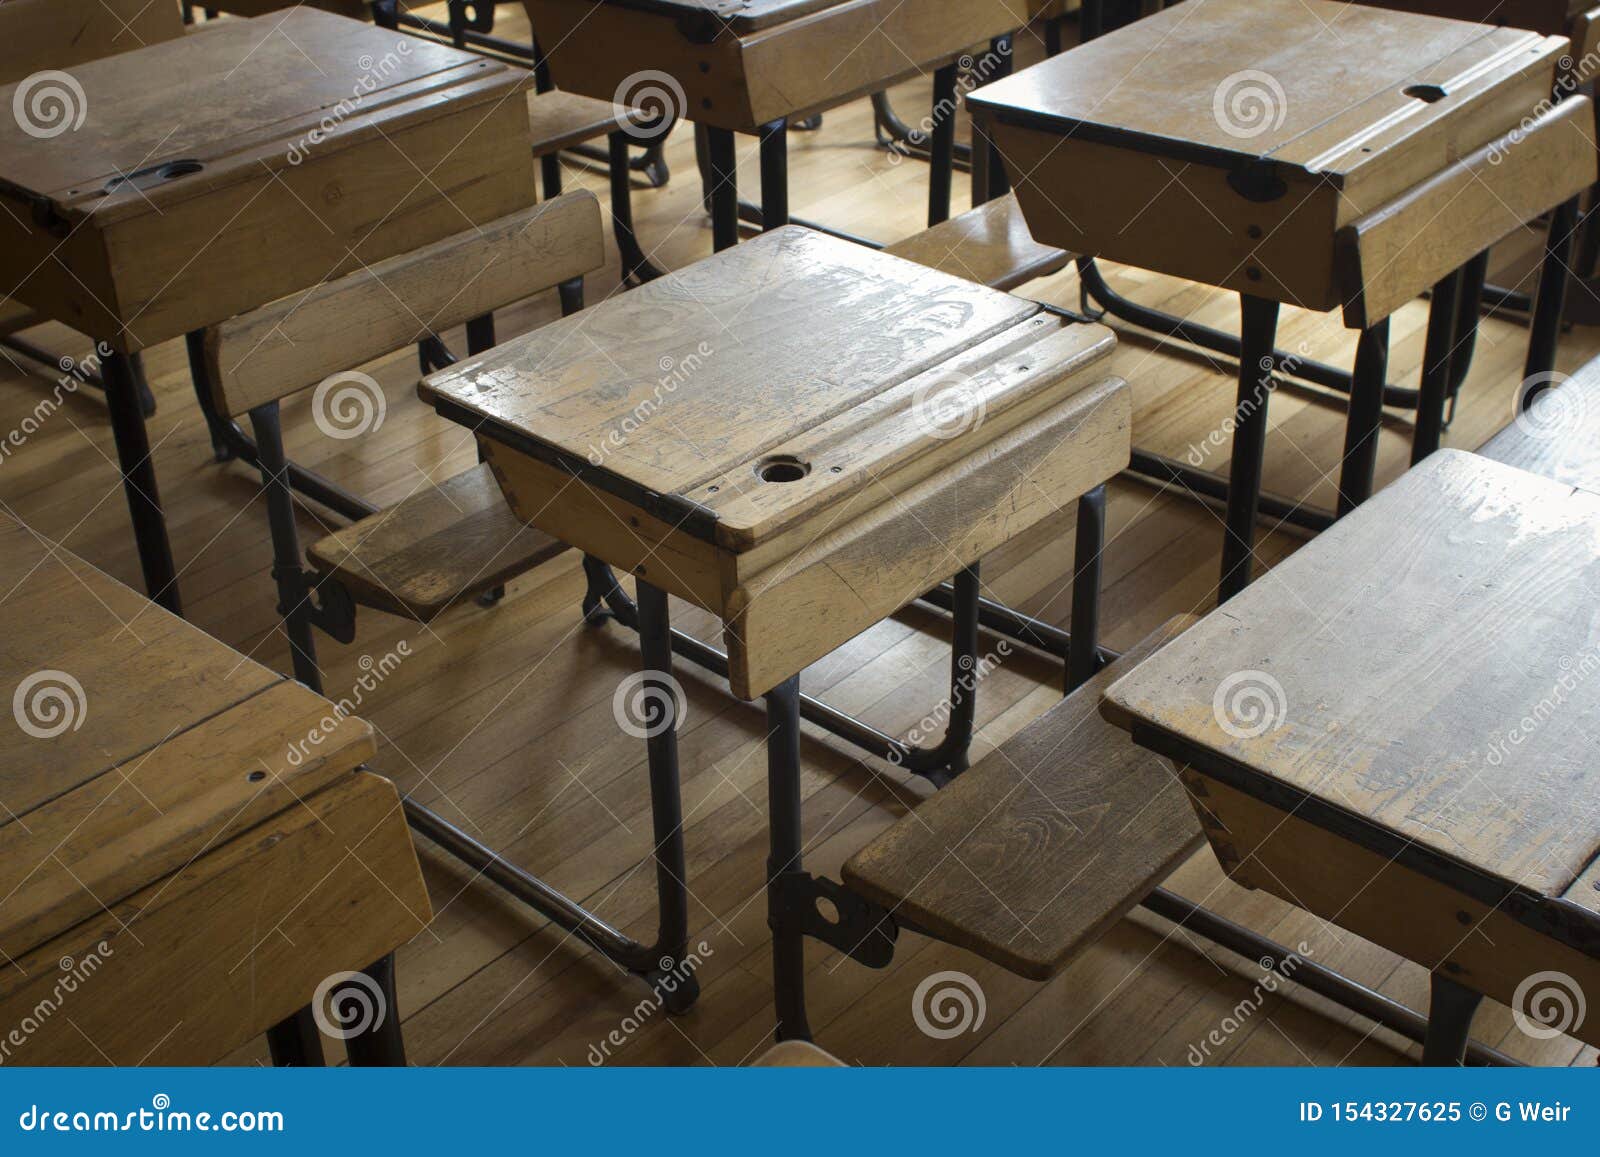 A Old Style School Desks Stock Image Image Of Historical 154327625